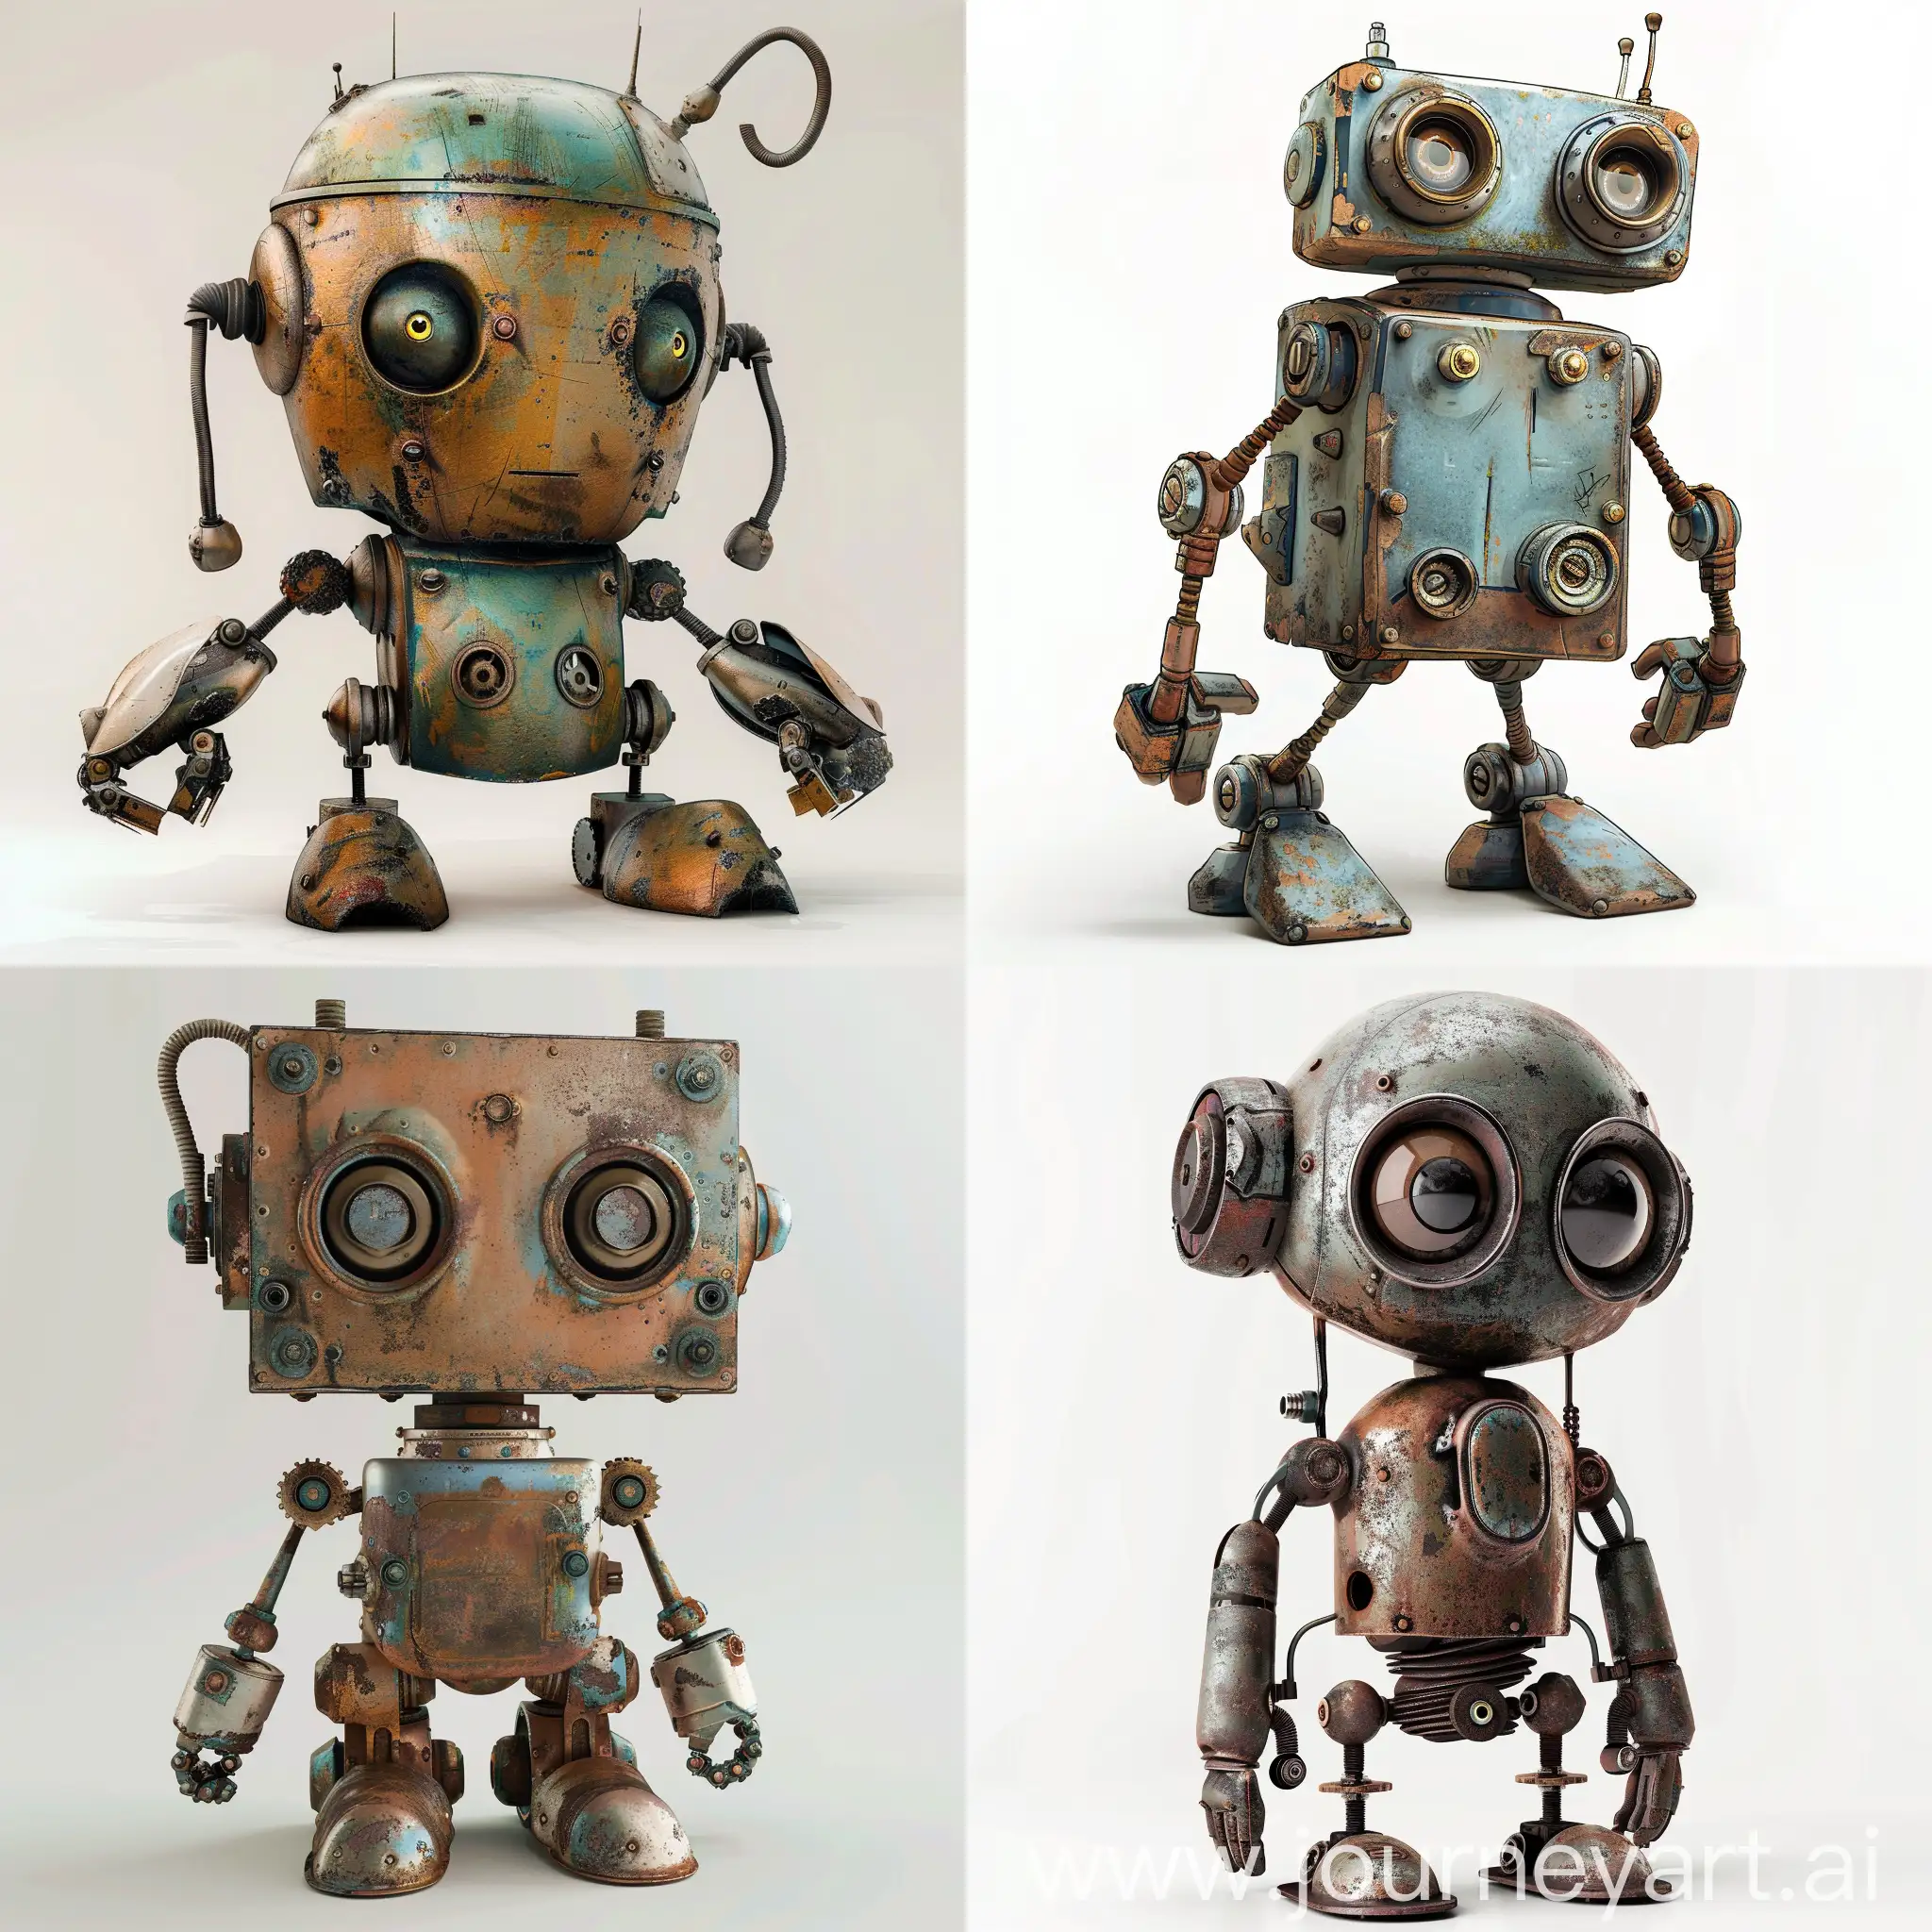 Charming-VintageStyle-Robot-with-Whimsical-Appeal